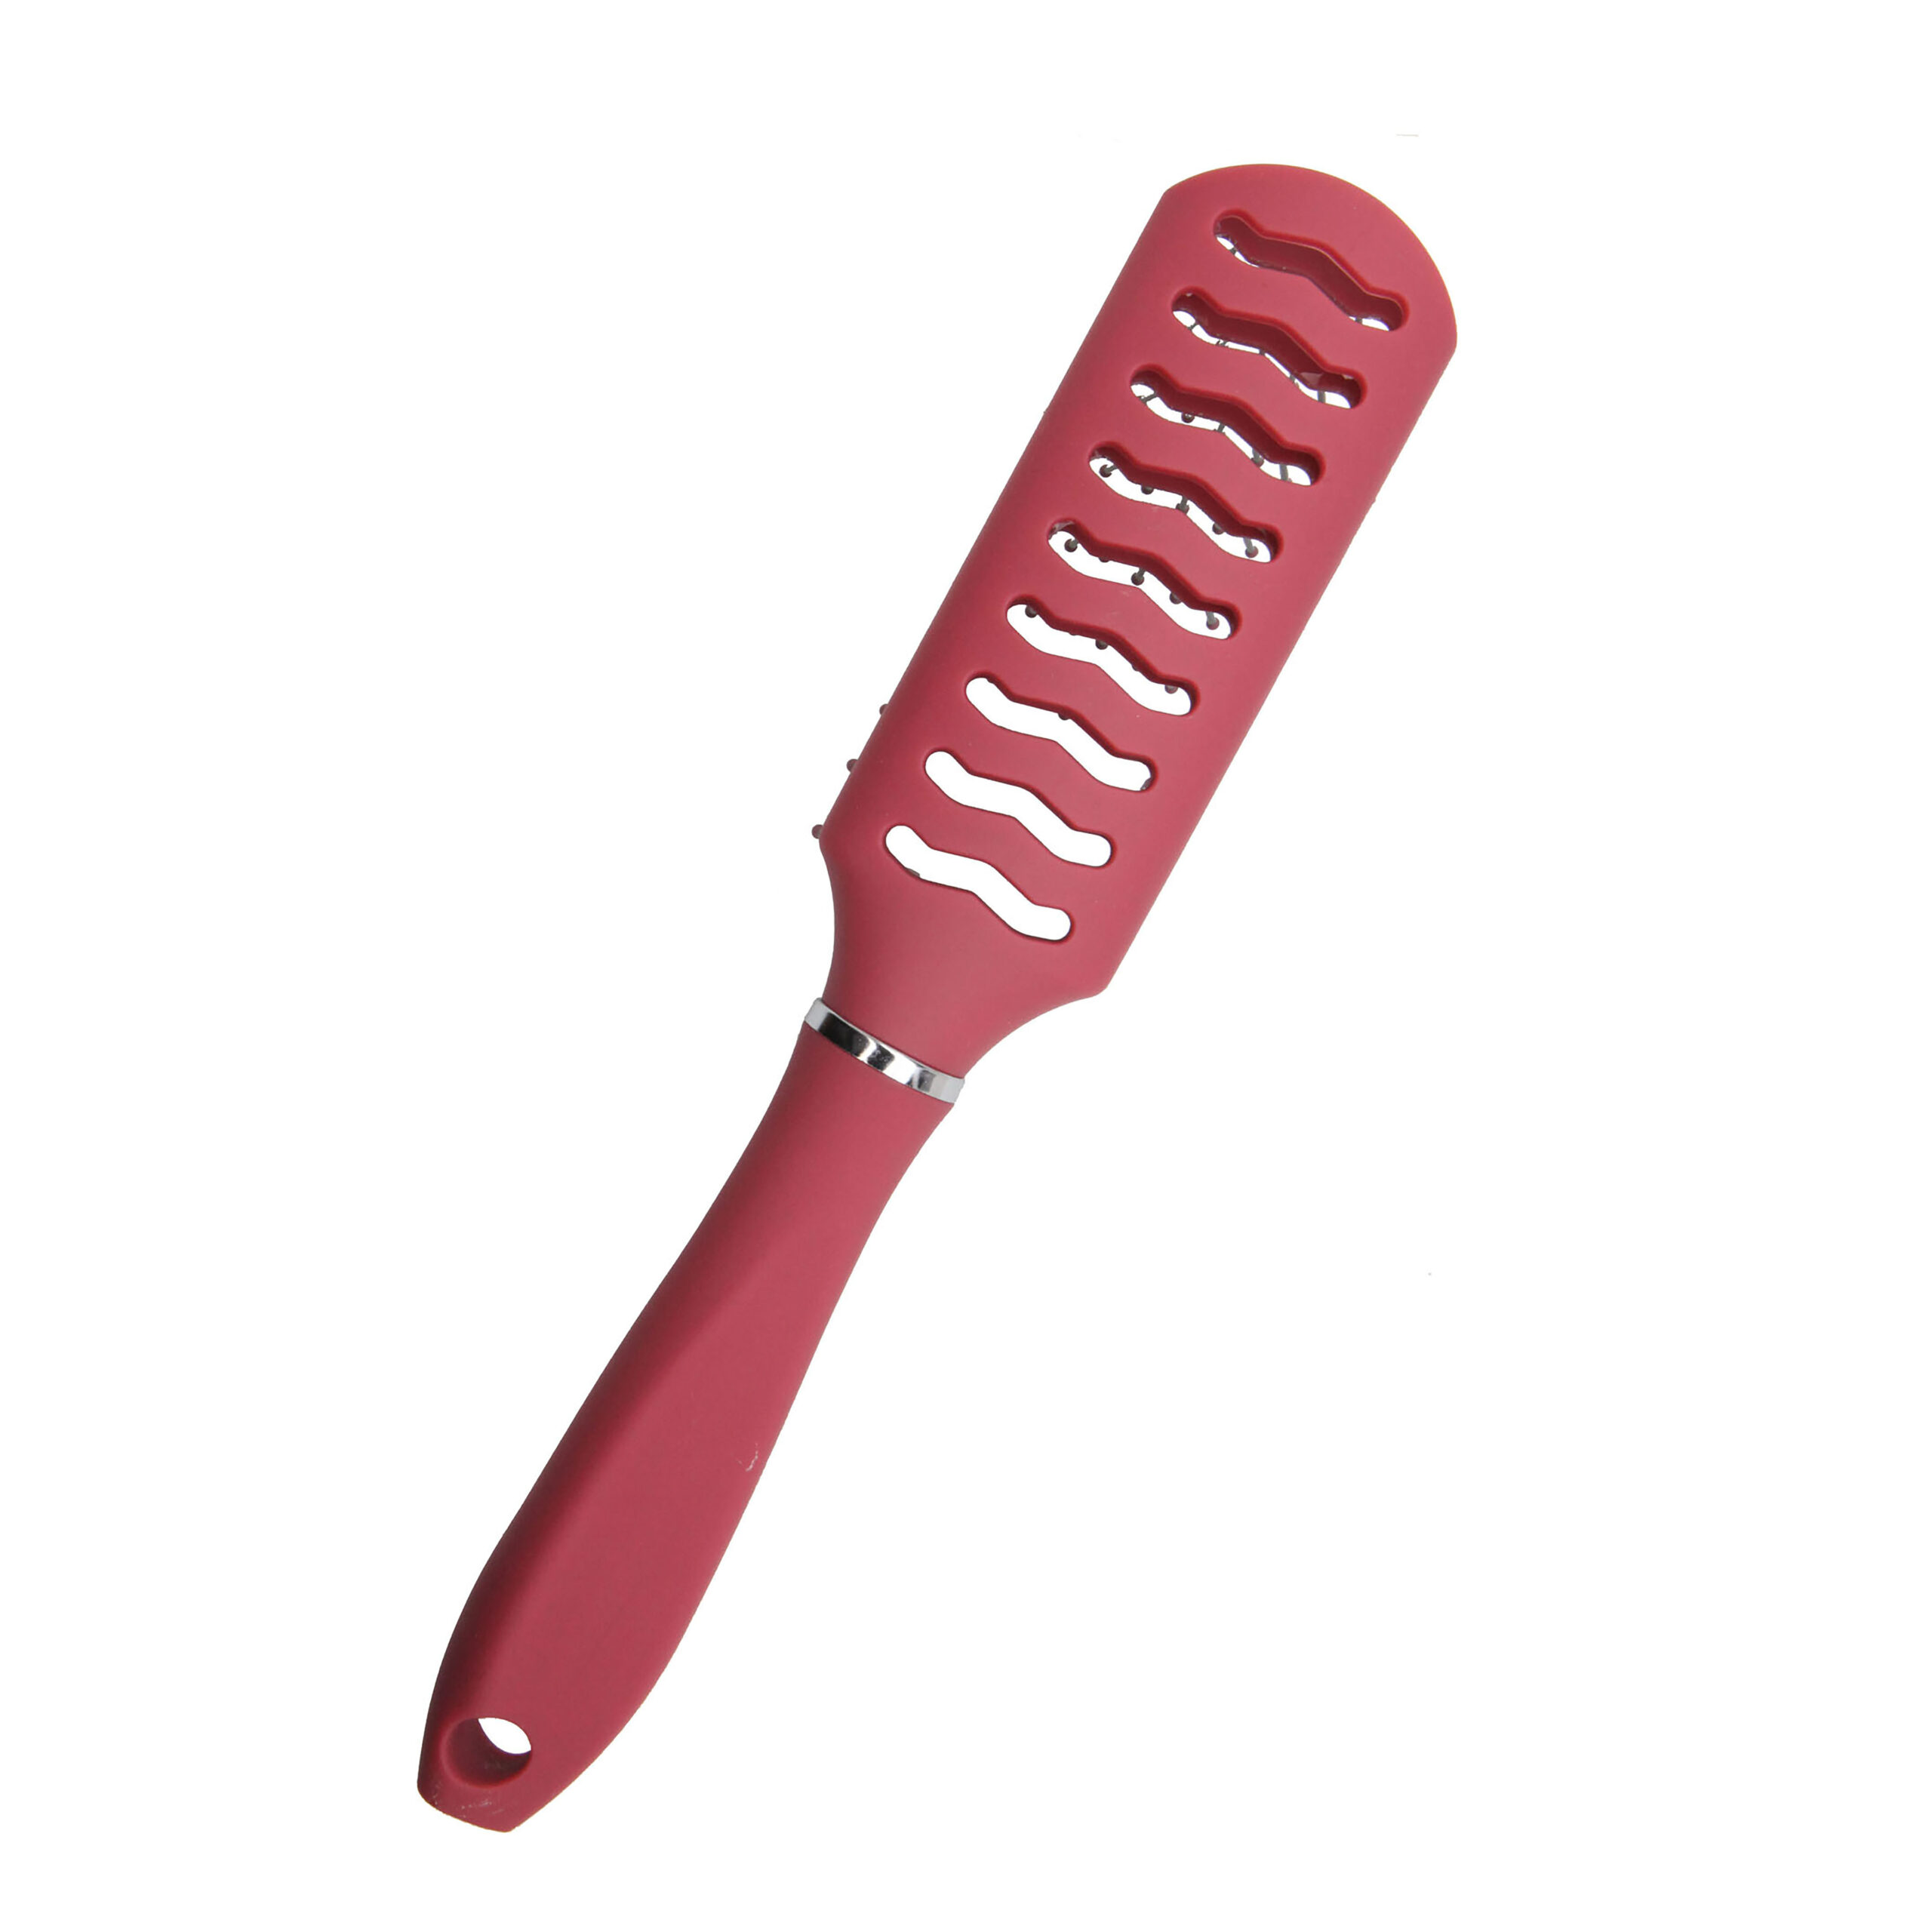 SOFT TOUCH VENT BRUSH